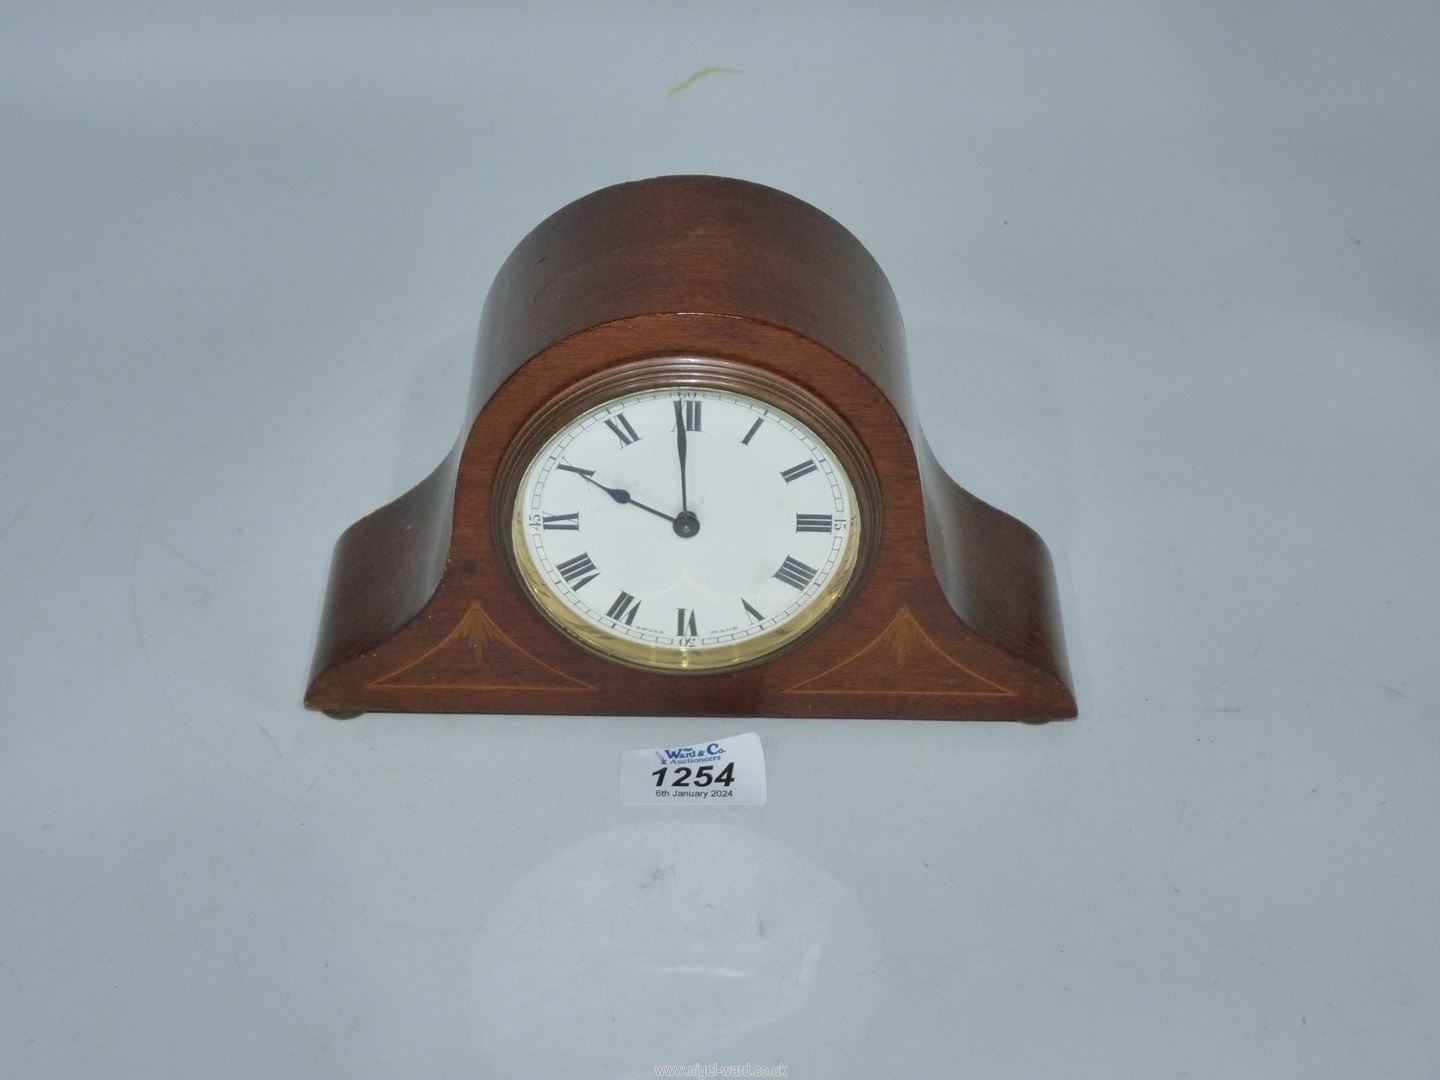 An attractive Mahogany/Walnut cased Mantel Clock of compact dimensions with inlaid decoration, - Image 5 of 5